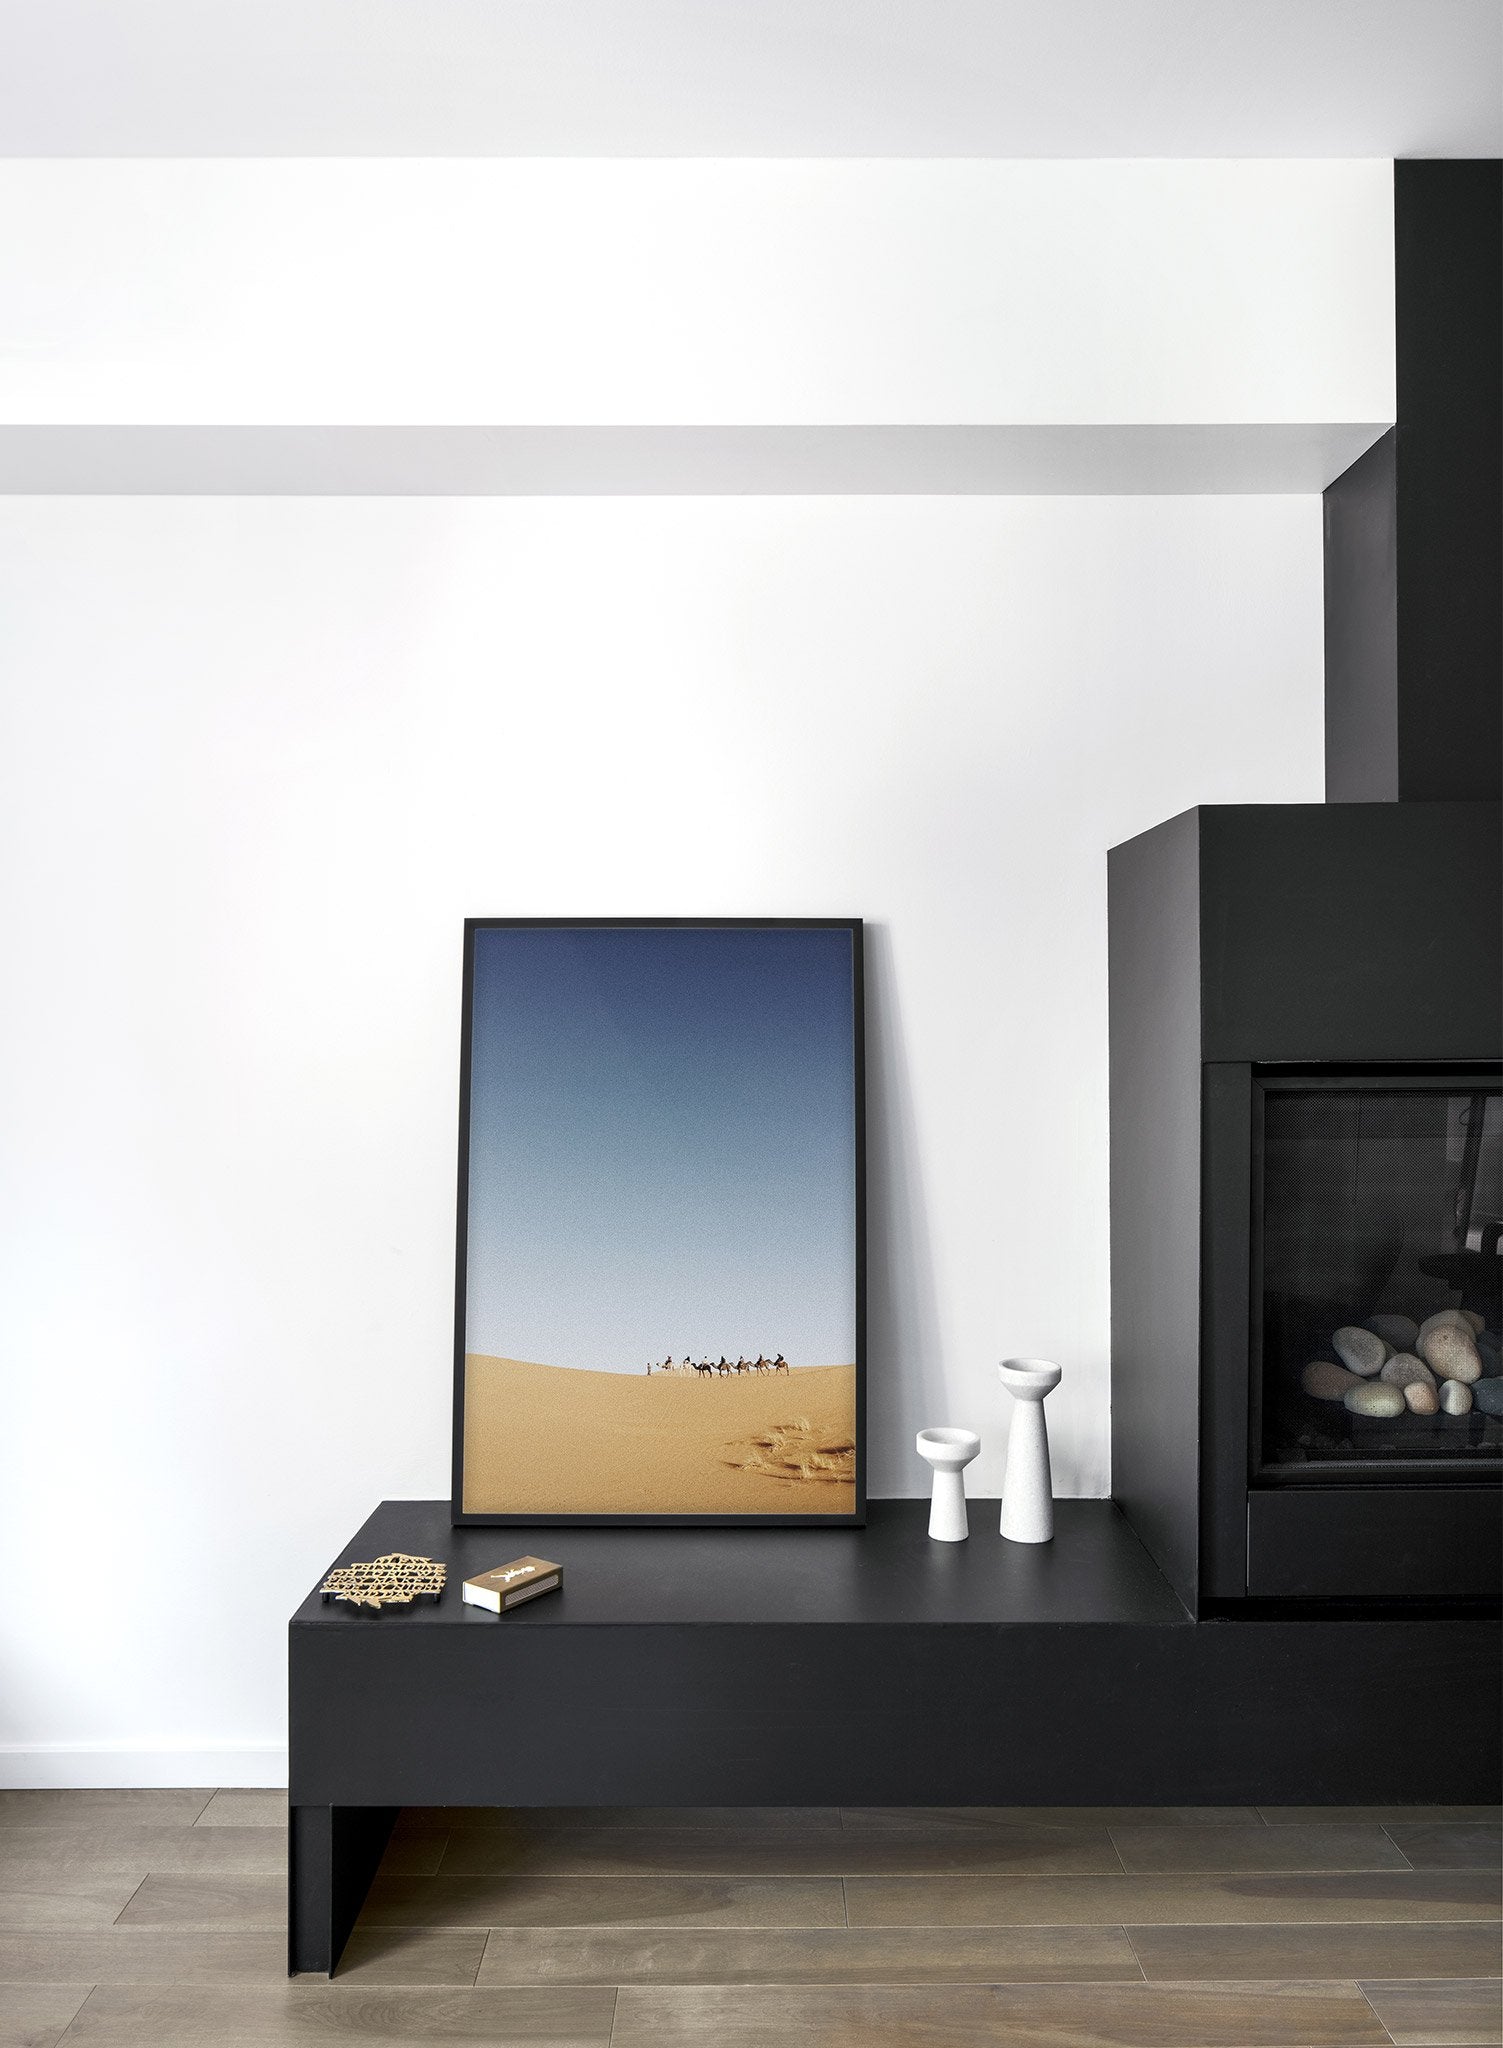 Modern minimalist poster by Opposite Wall with photography of camel Caravan in Sahara Desert - Lifestyle - Living Room